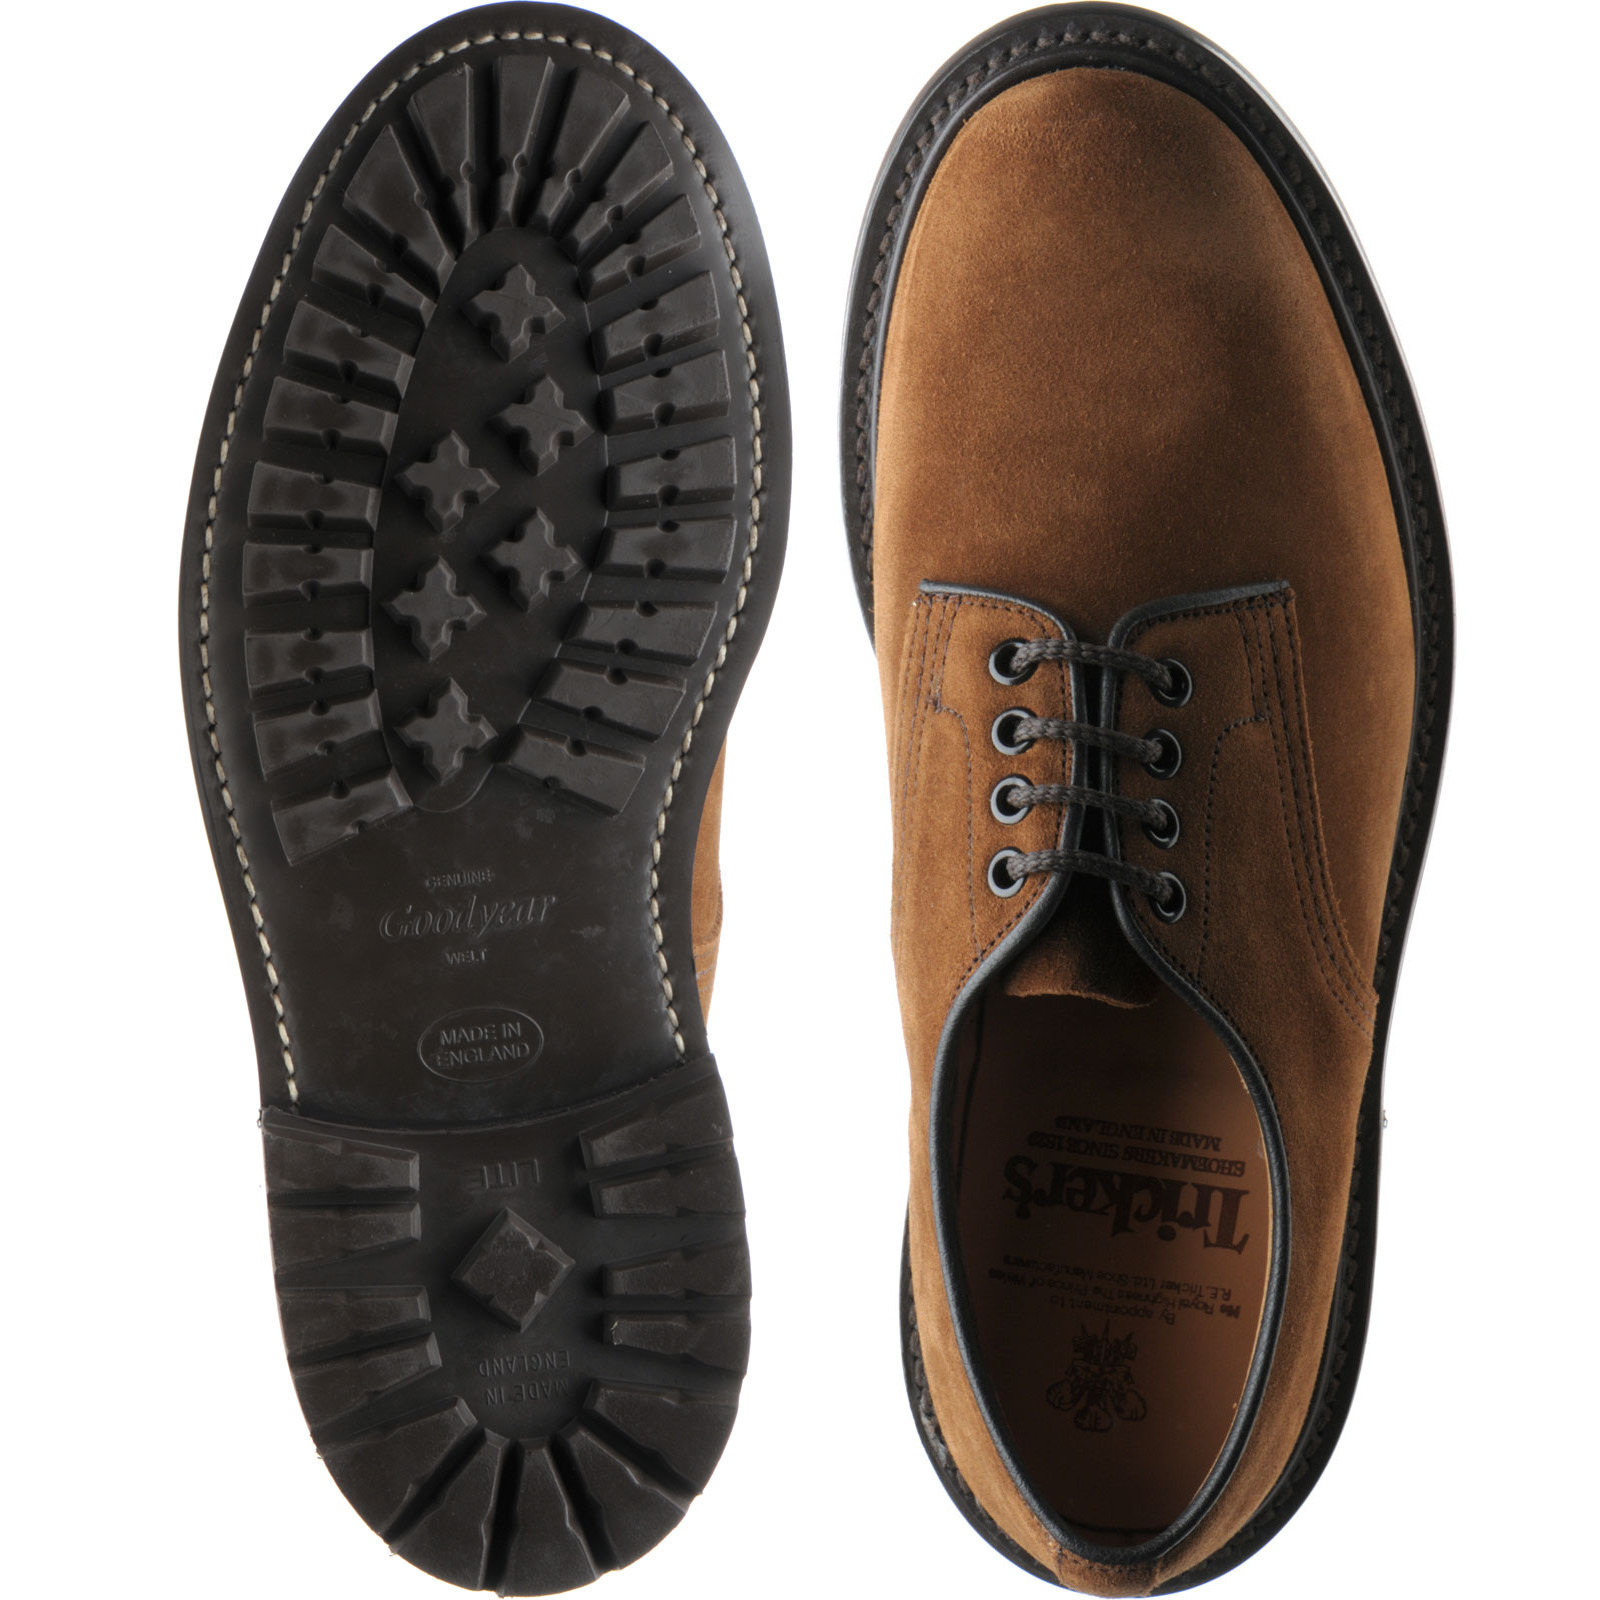 Trickers shoes | Trickers Country Collection | Daniel rubber-soled ...